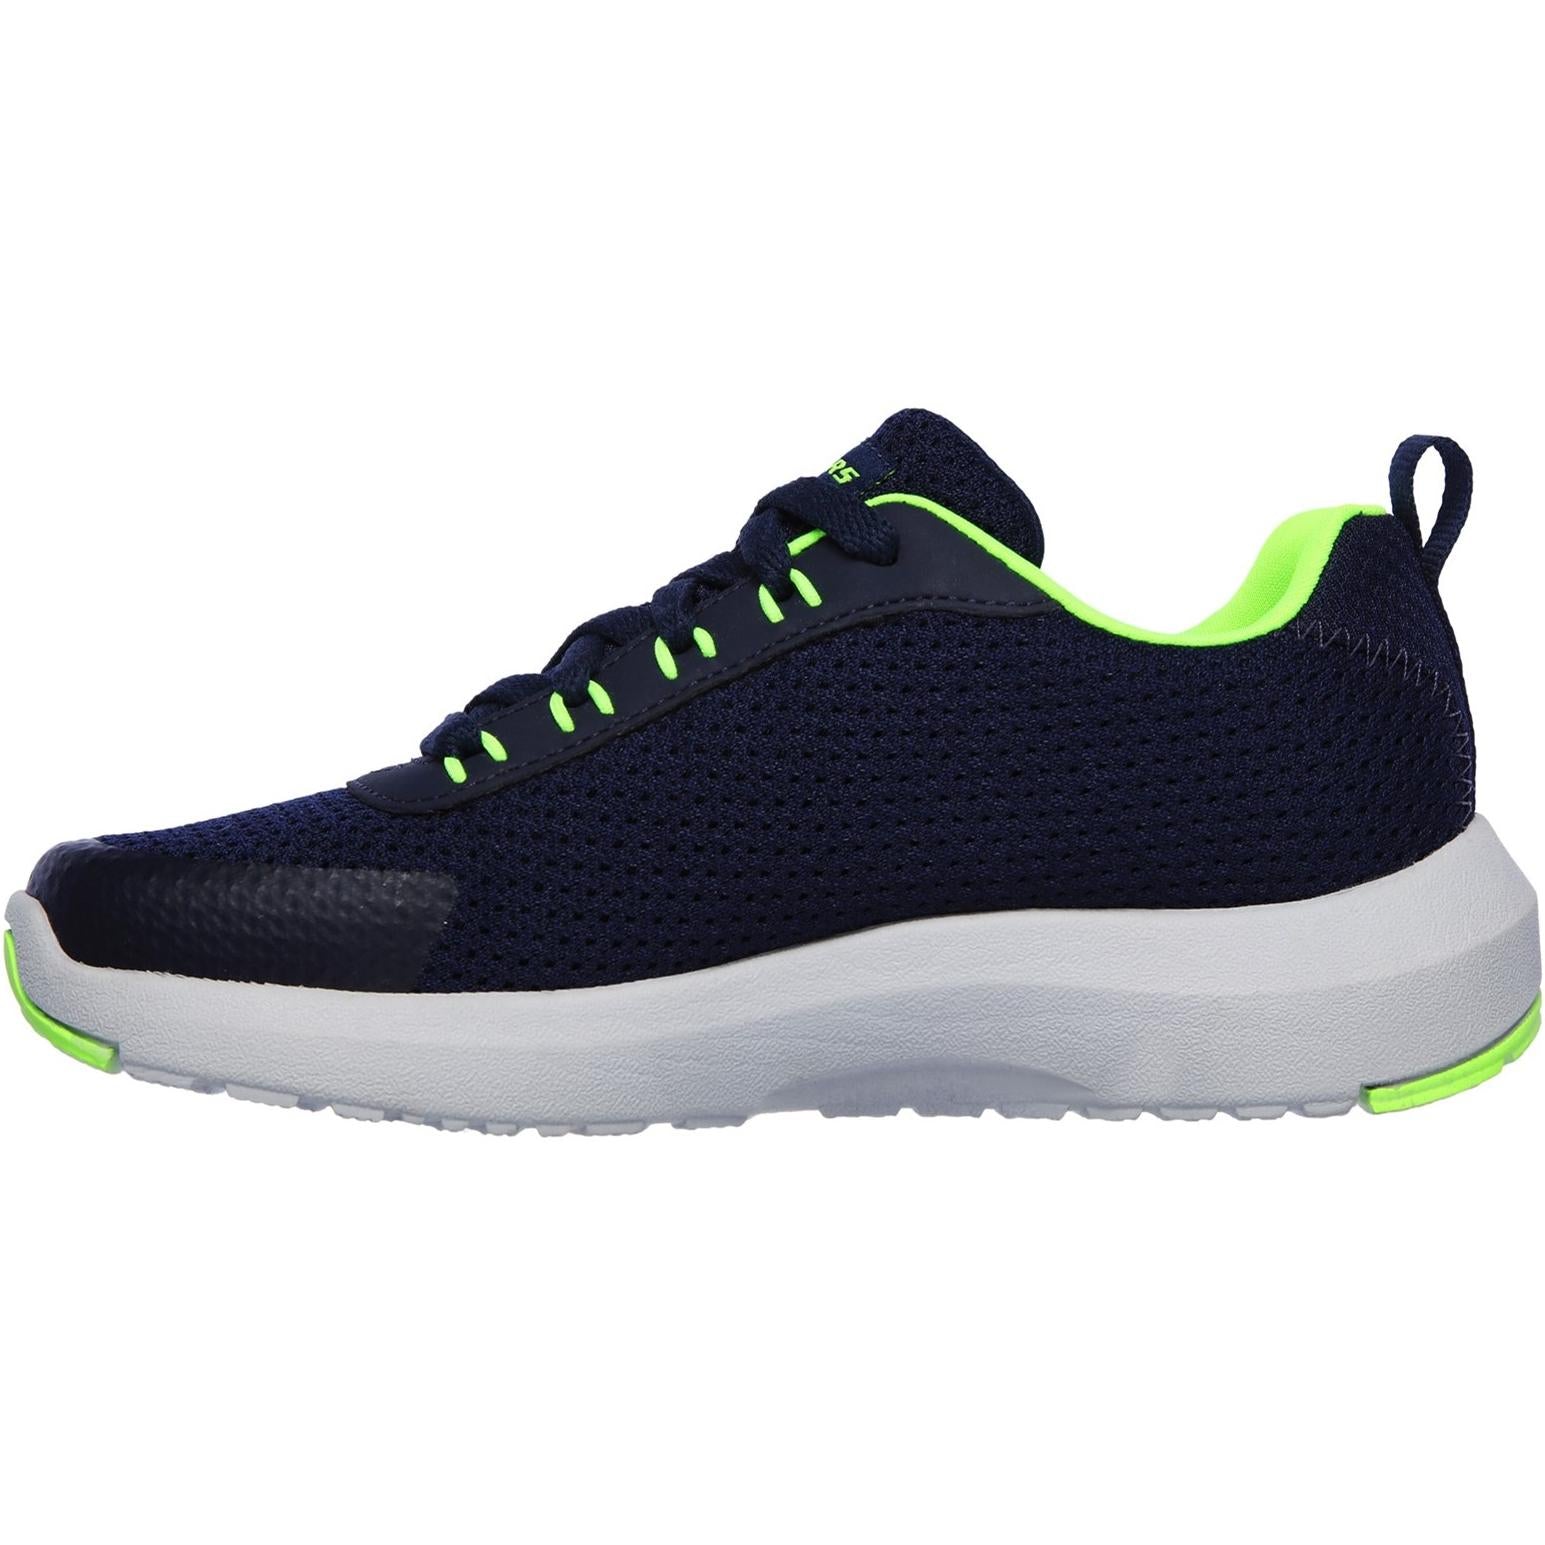 Skechers Dynamic Tread-Nitrode Lightweight Lace Up Trainer with Outsole Detail